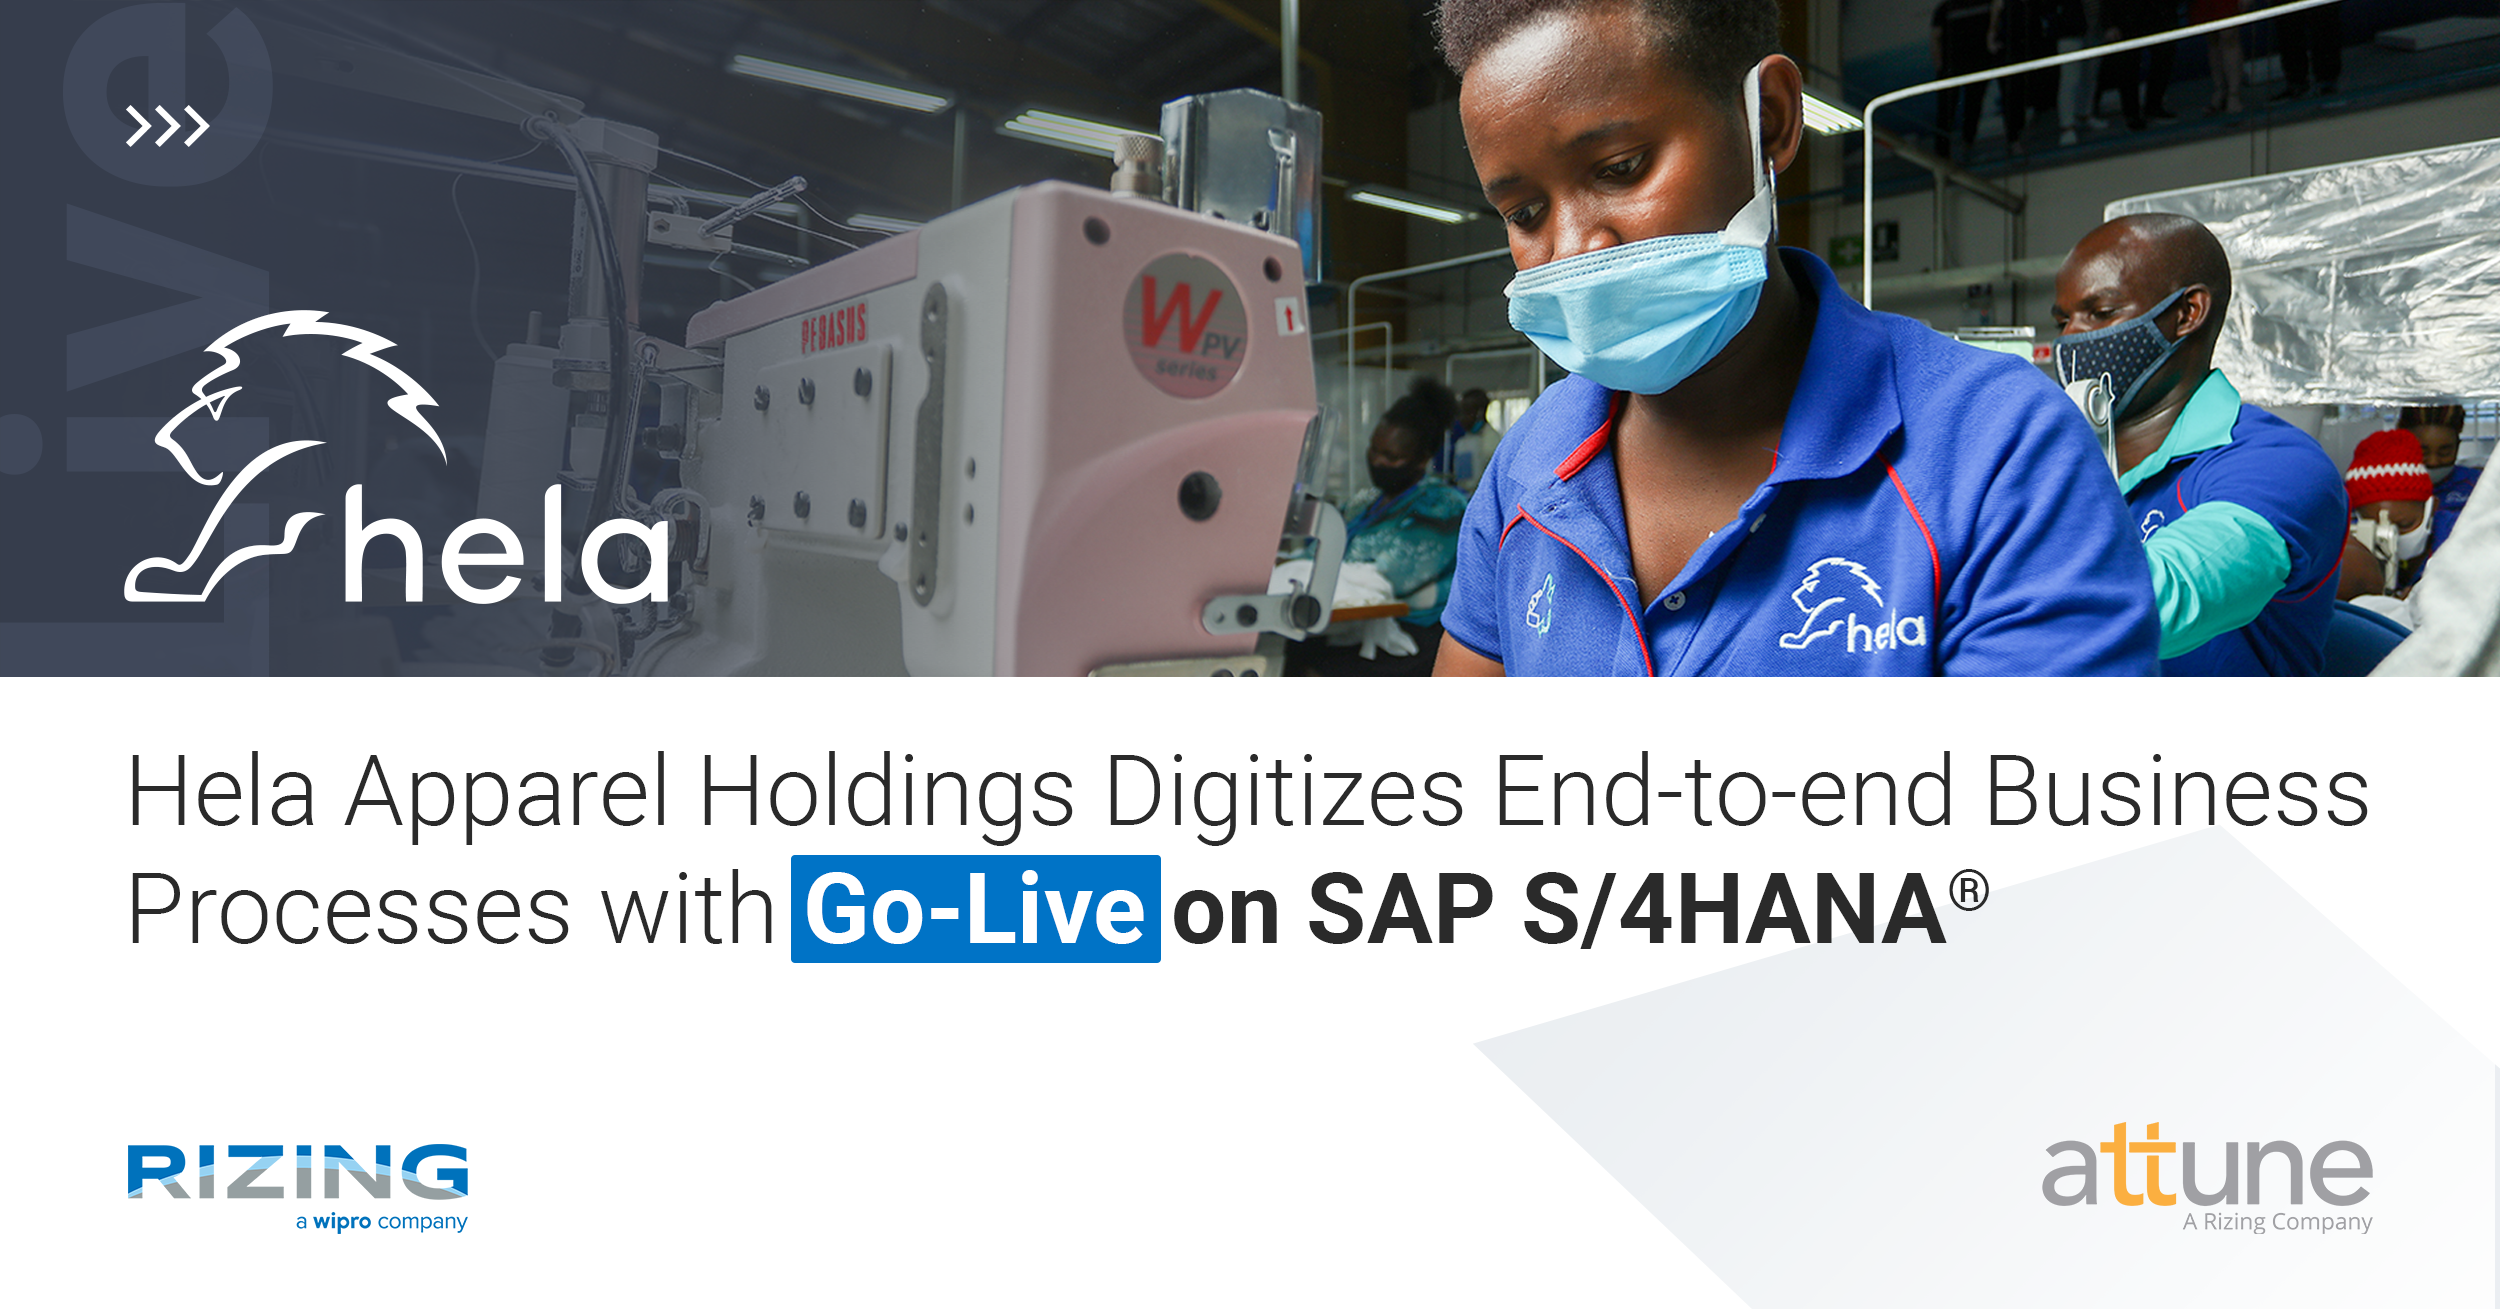 Hela Apparel Holdings Consolidates Growth with Go-Live on SAP S/4HANA® with attune, a Rizing Company